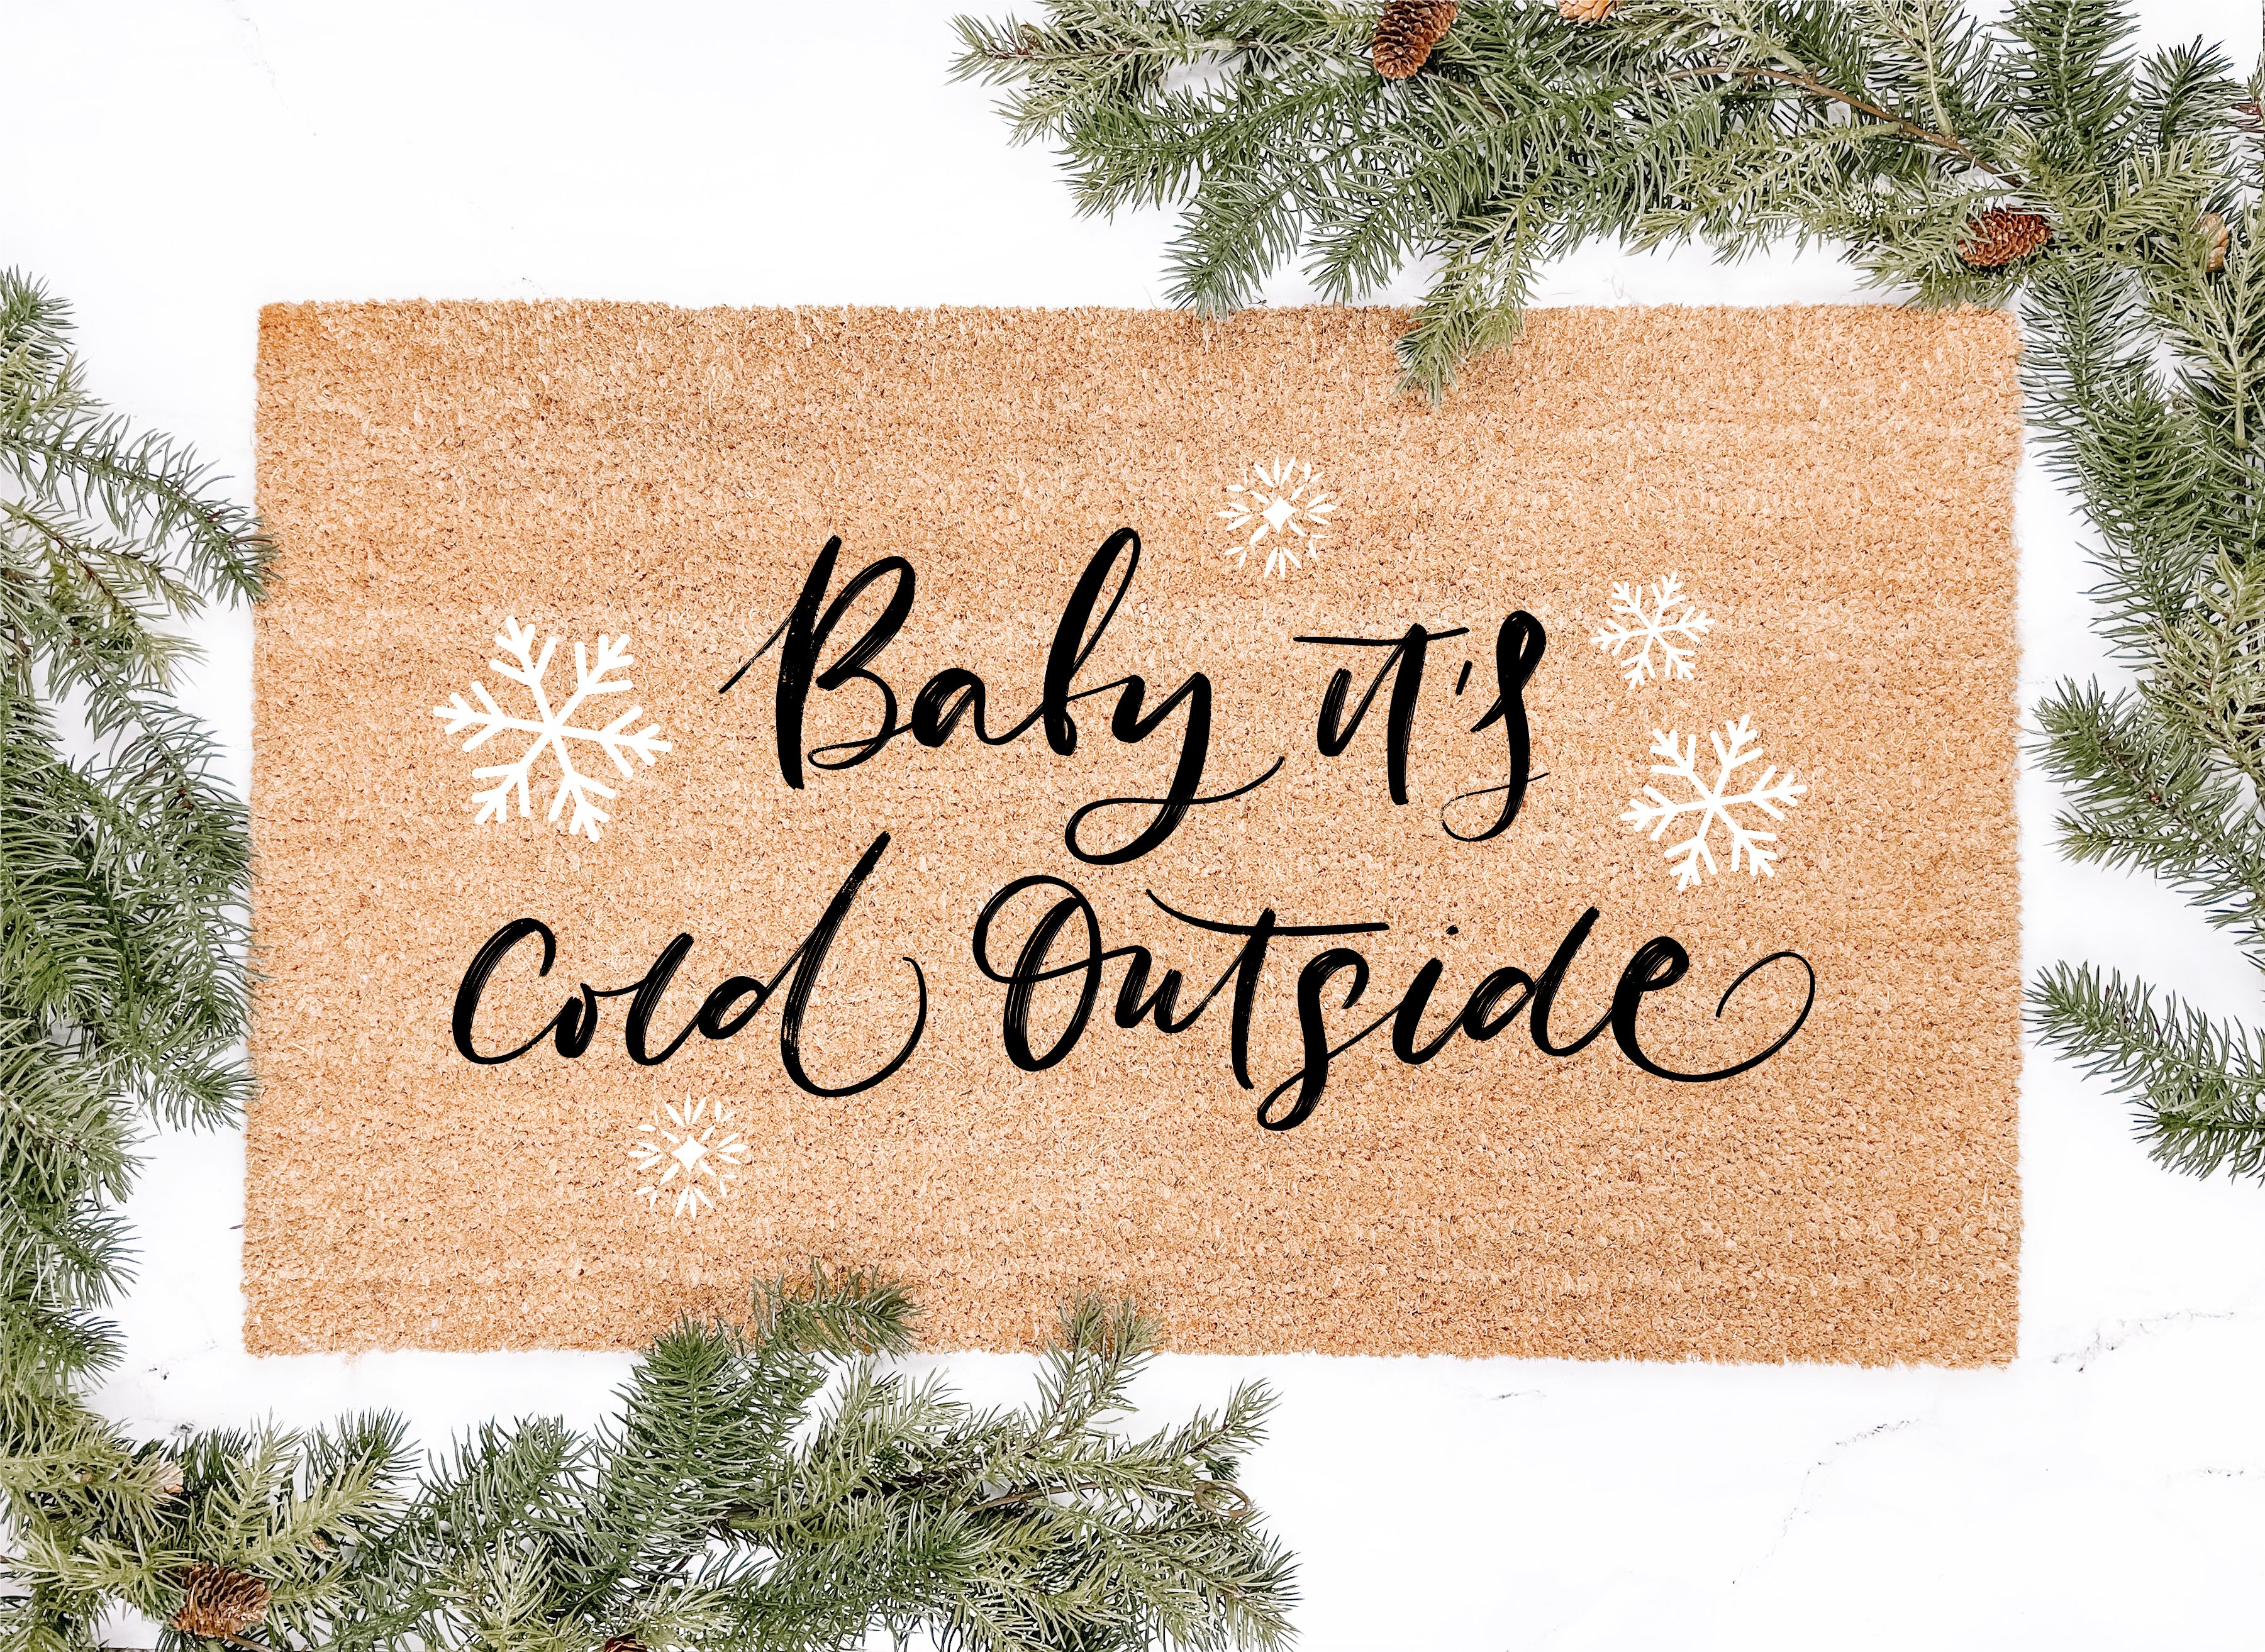 Baby It's Cold Outside v2 Doormat